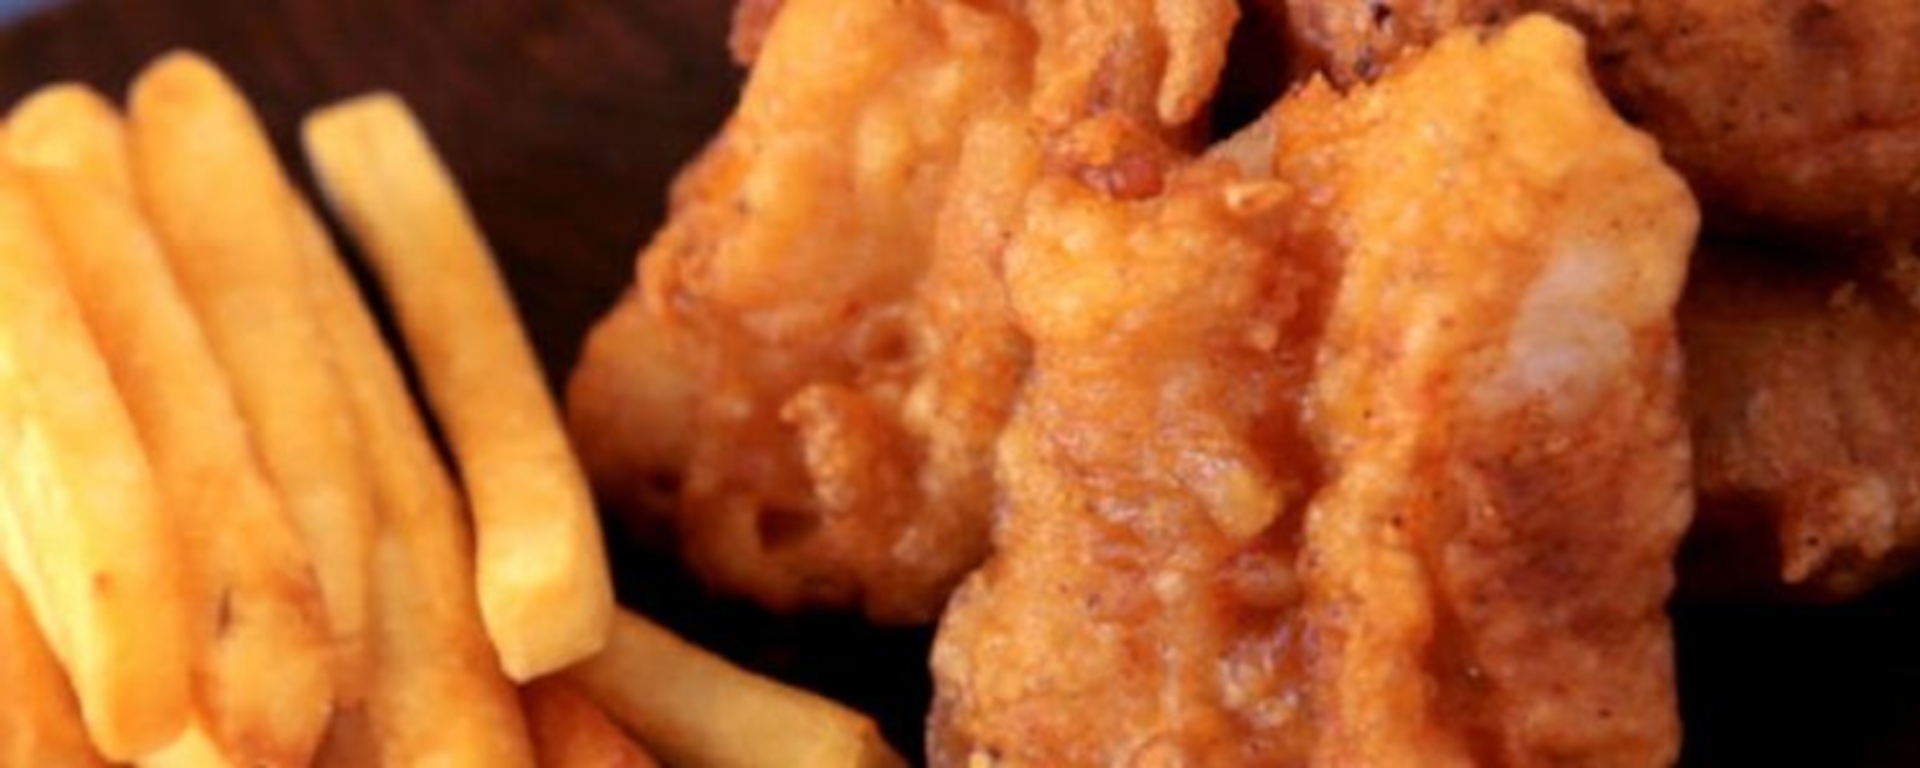 LuvMyRecipe.com - Beer Battered Malwani Fish and Chips Featured